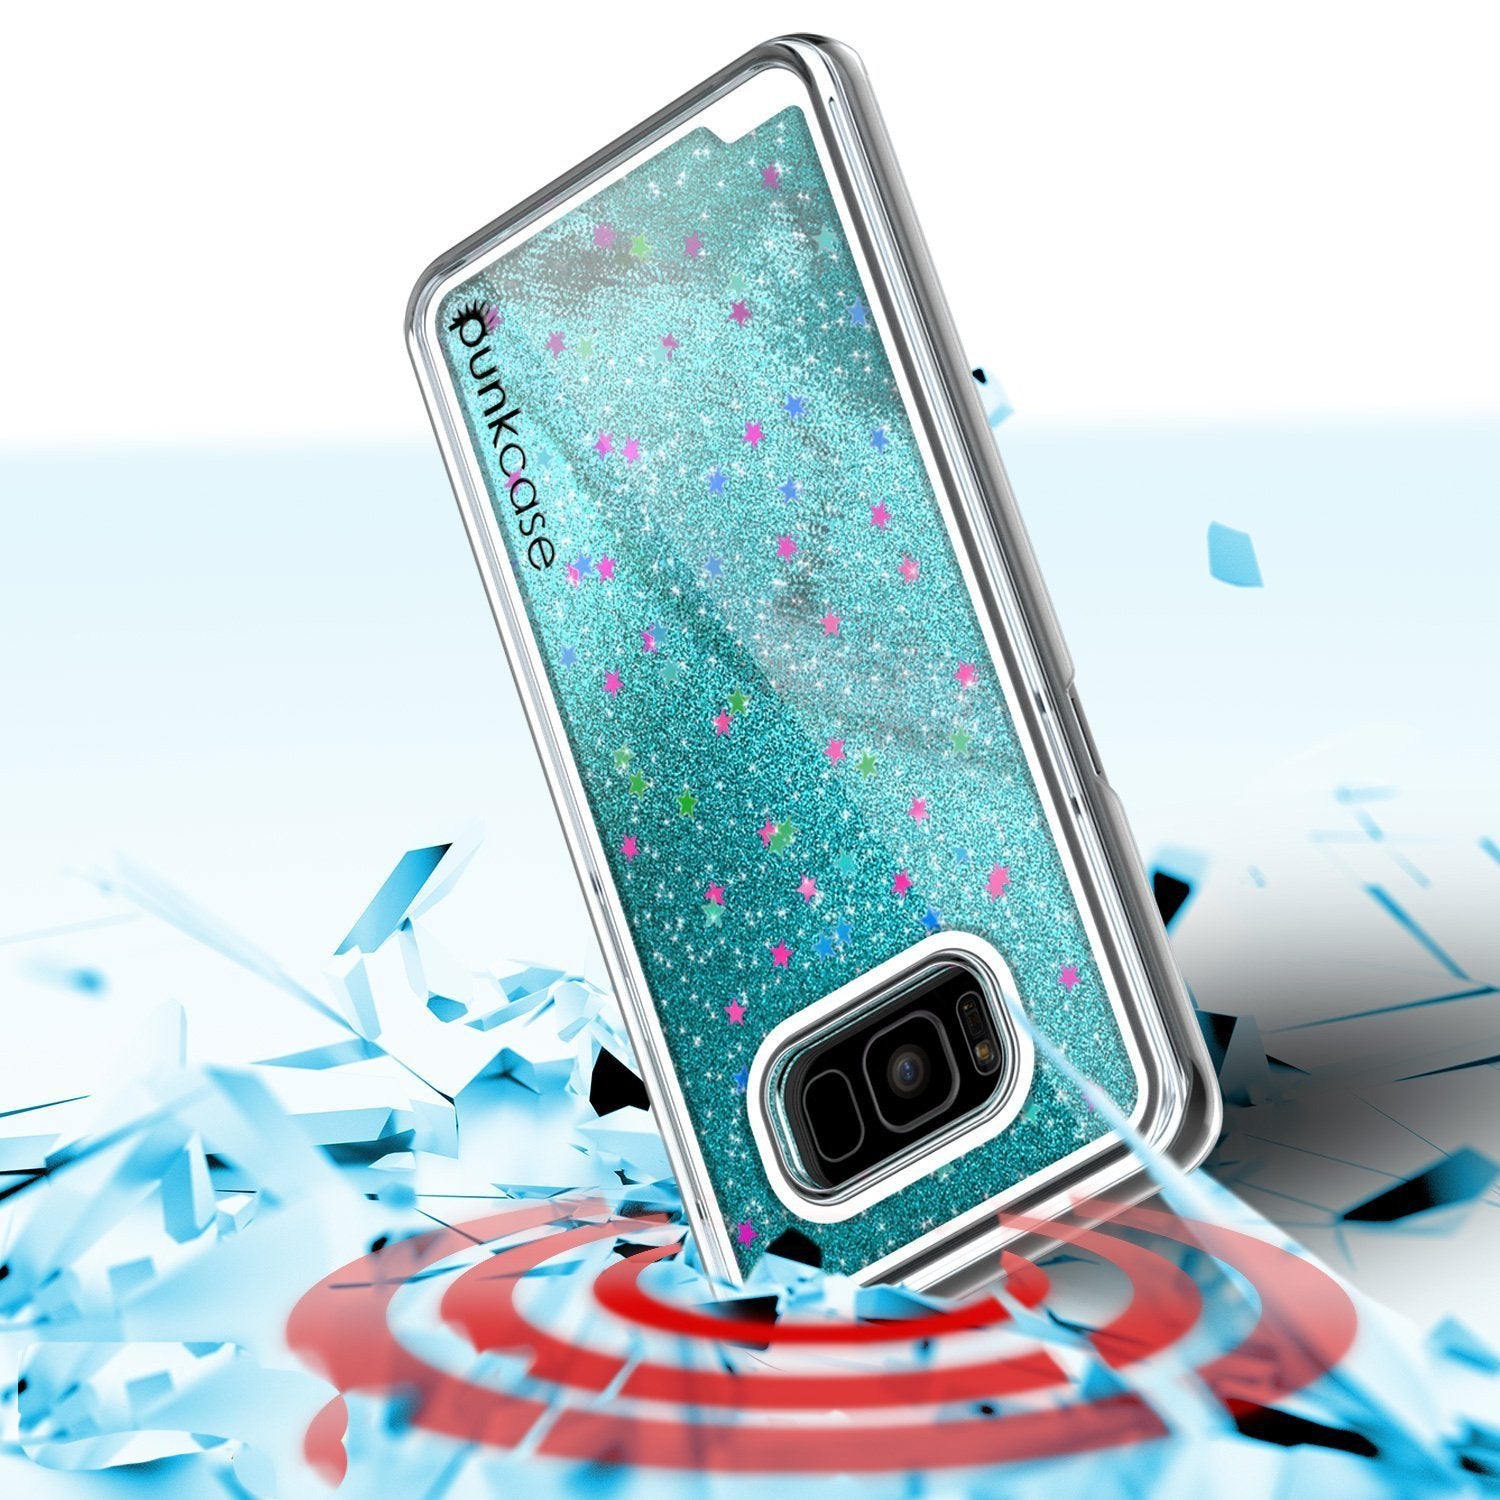 Galaxy S8 Case, Punkcase Liquid Teal Series Protective Dual Layer Floating Glitter Cover